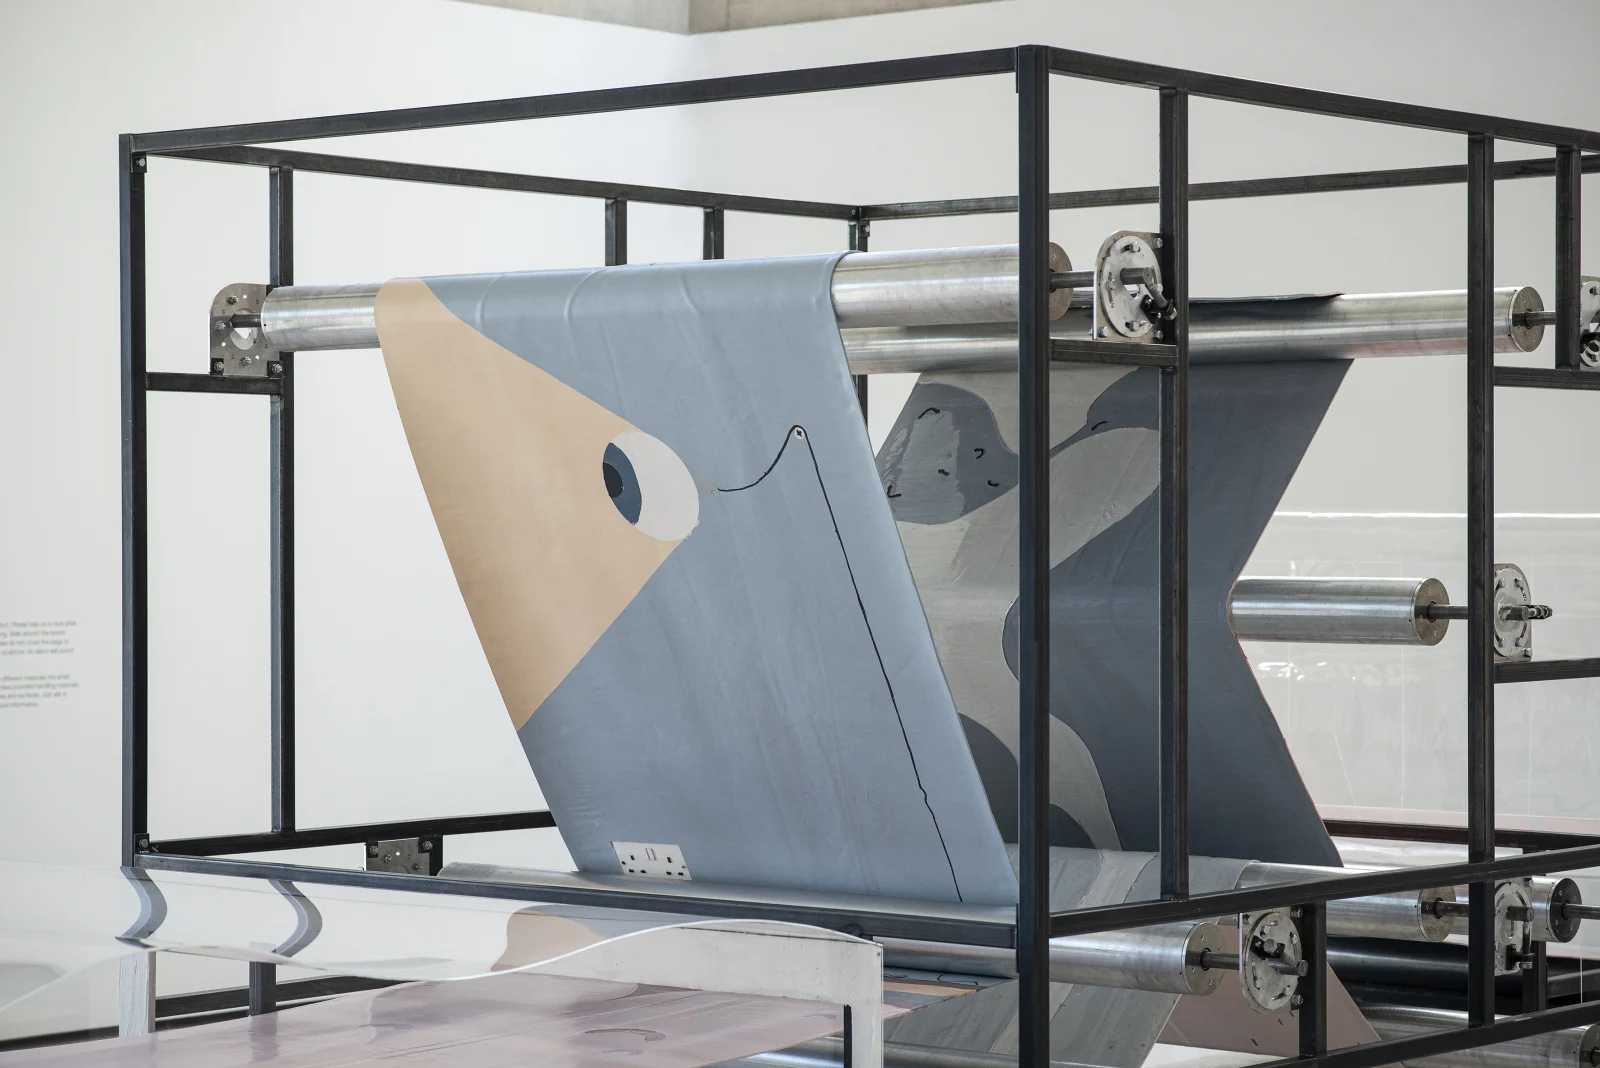 <p>Installation view: 'The Dump is Full of Images', Solo Exhibition, Weston Gallery, Yorkshire Sculpture Park, Yorkshire (2019).</p>